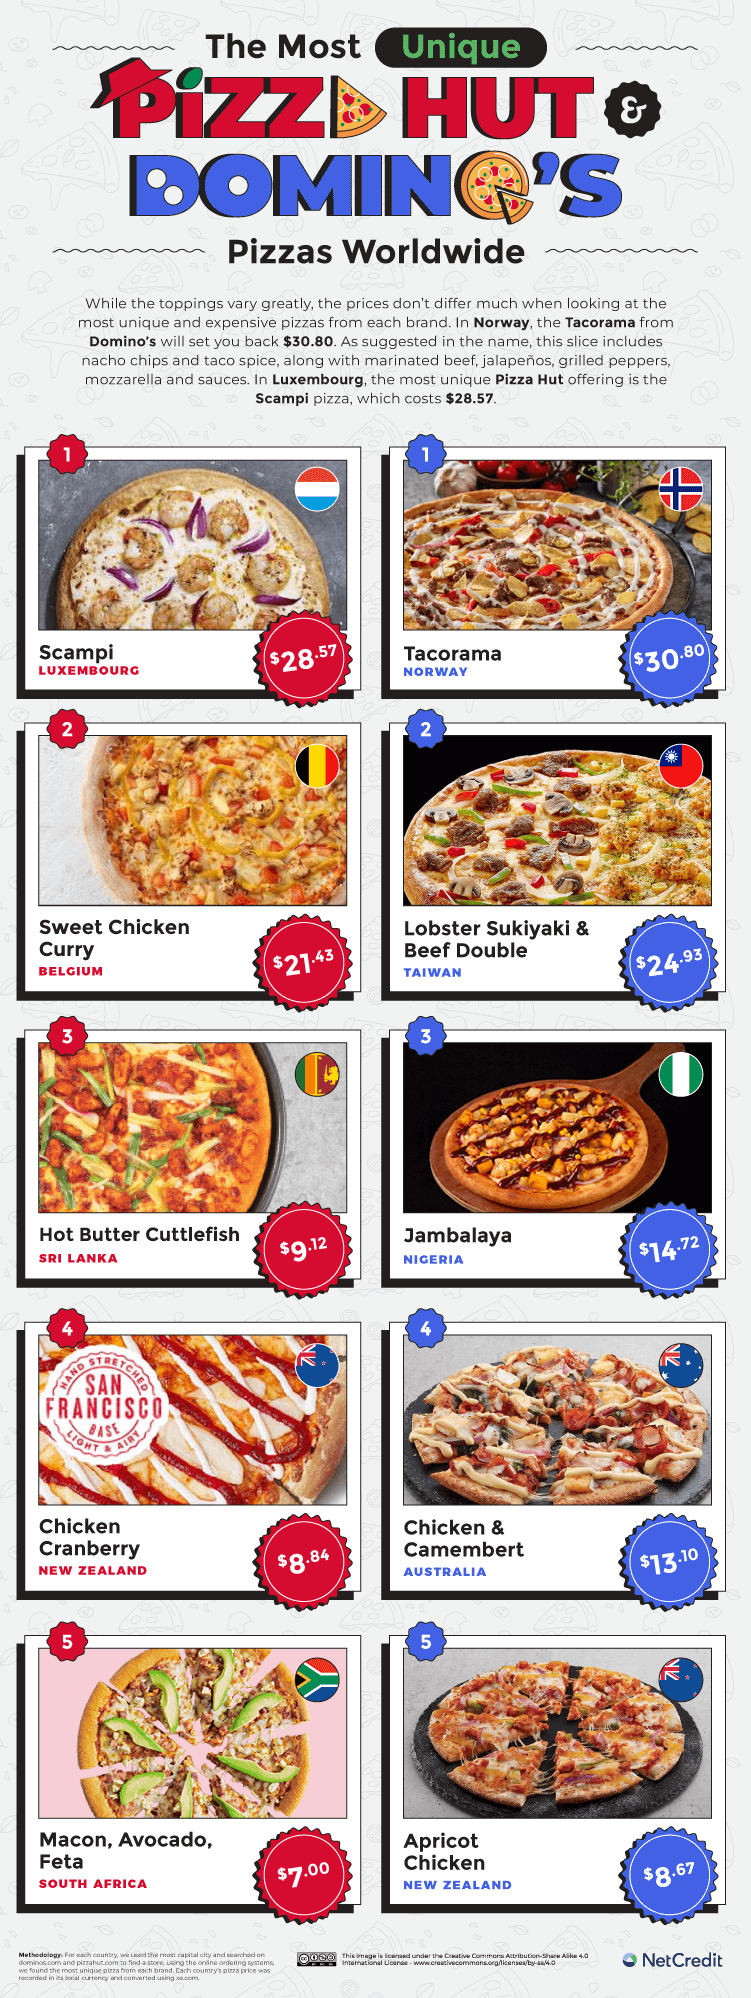 The Price of Pizza Huts and Dominos Most Unique